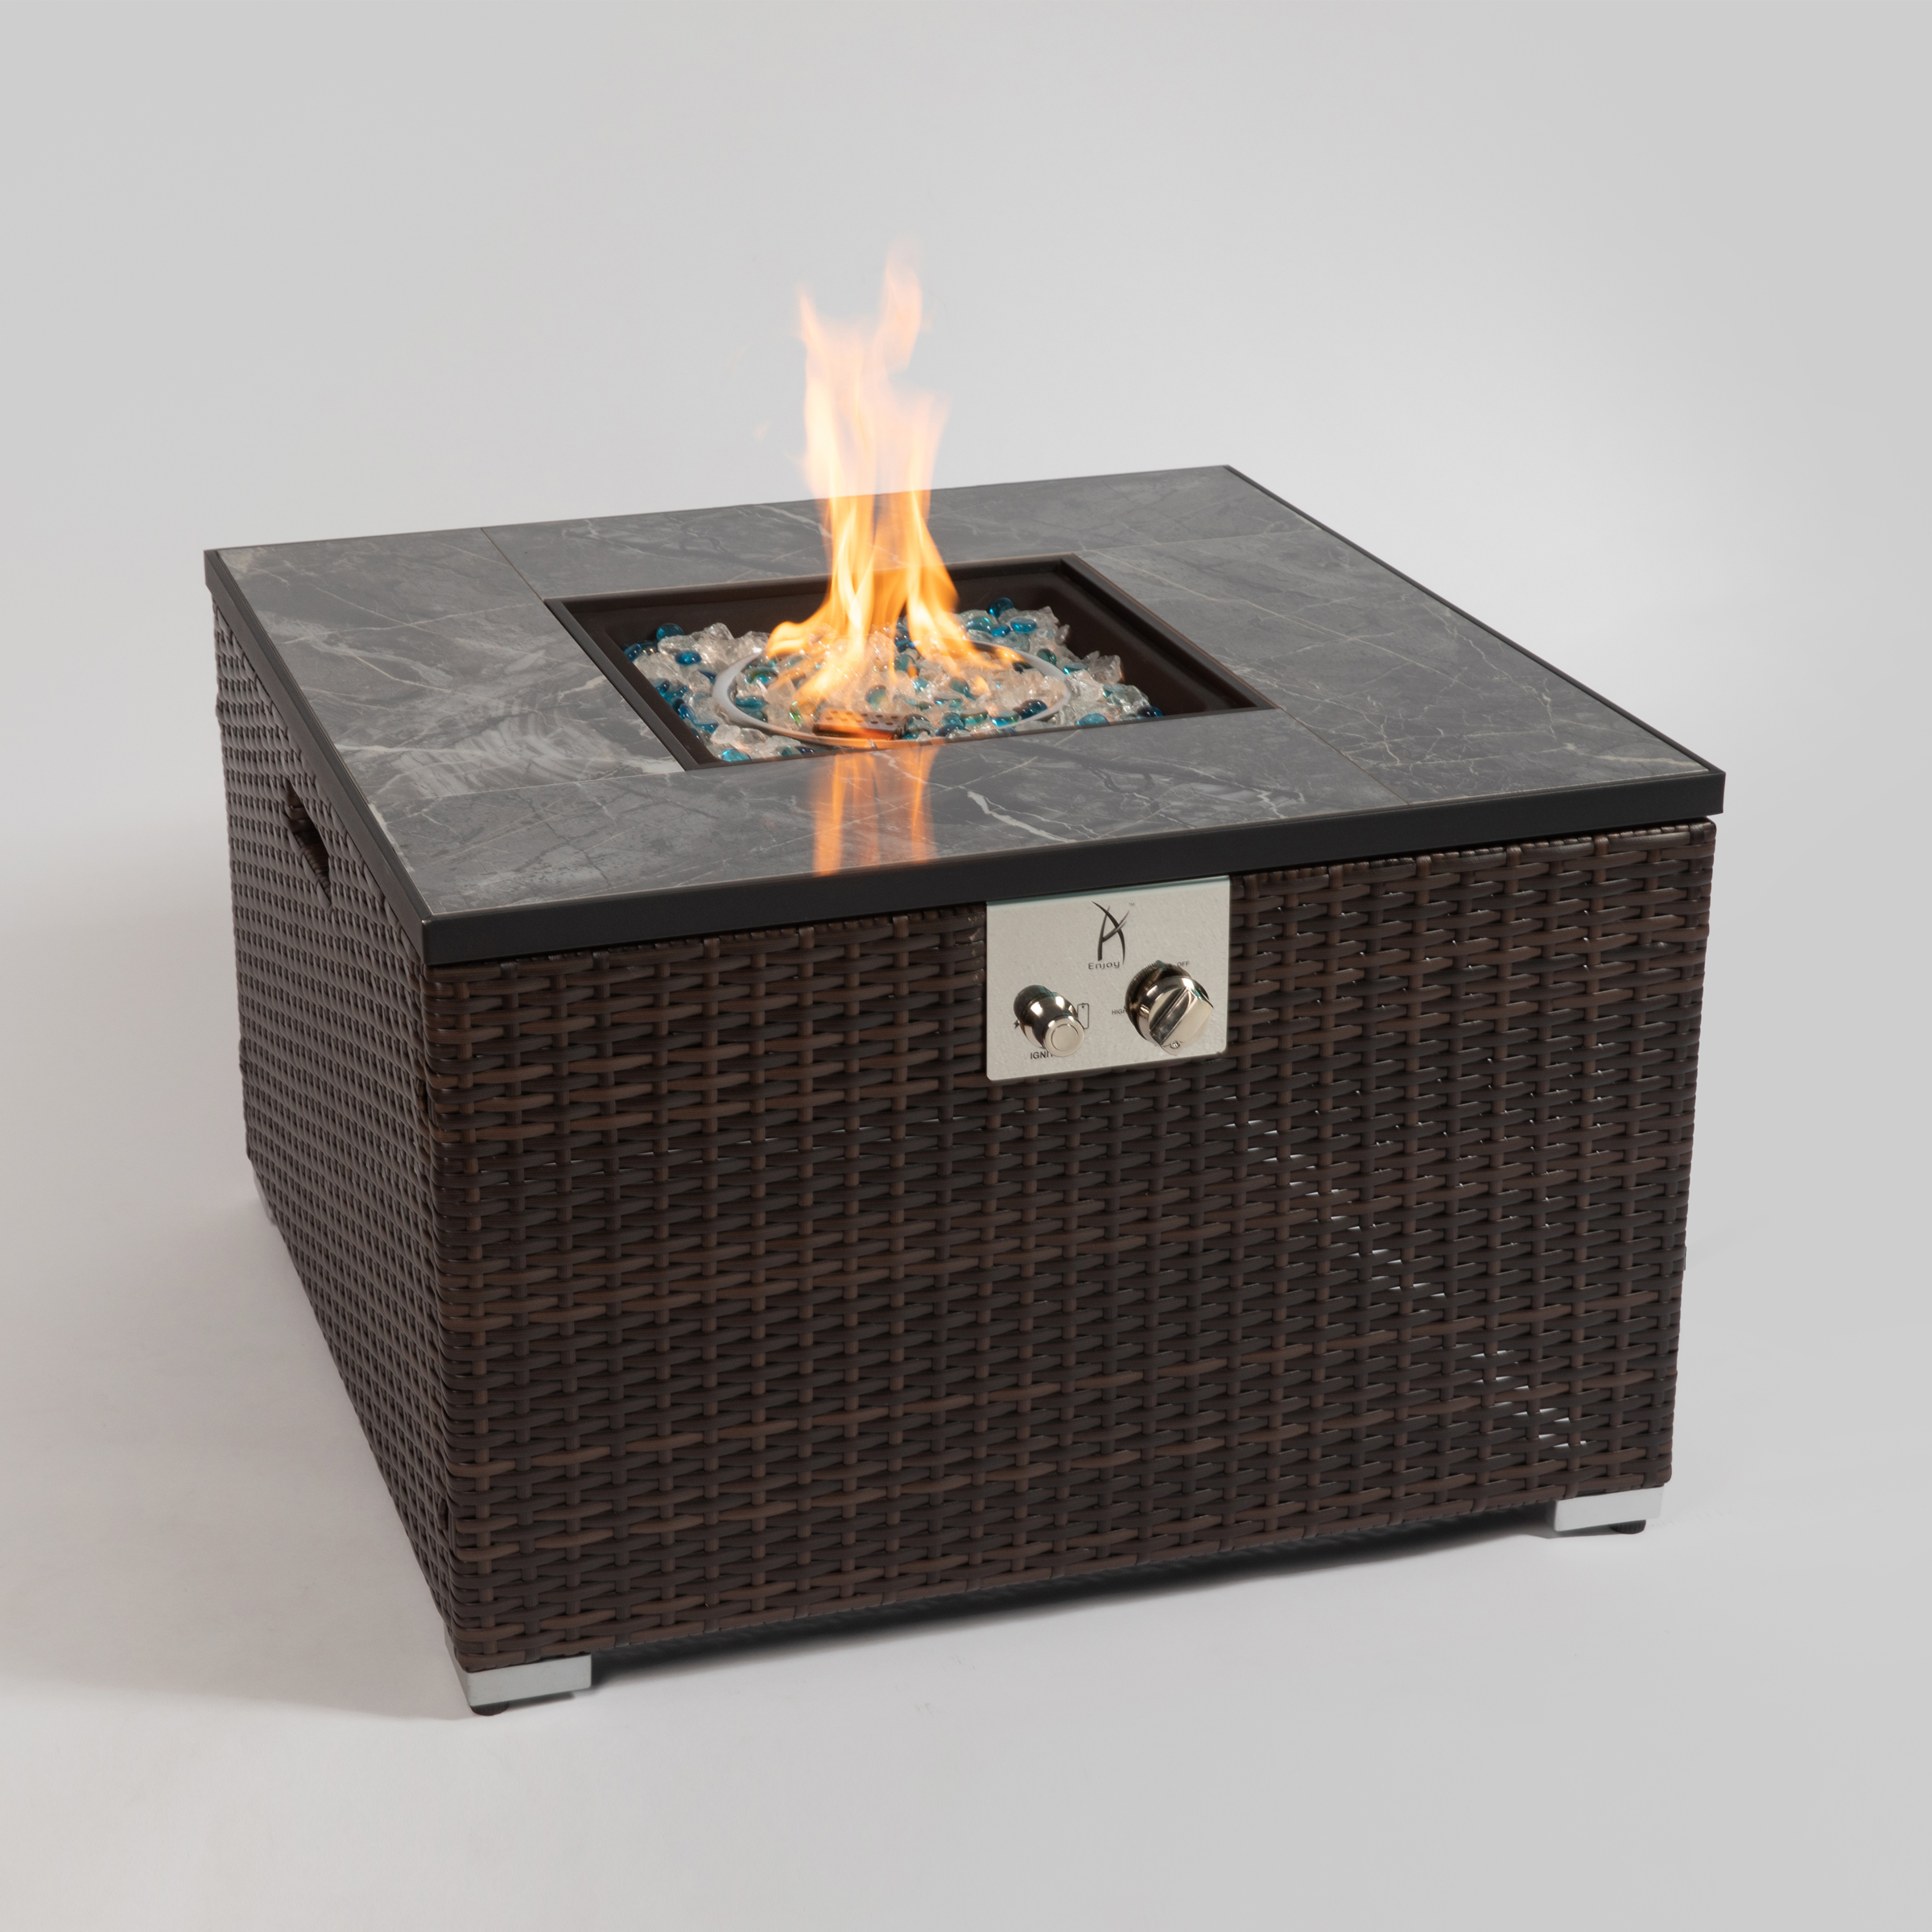 32in Square Fire Table with Ceramic Tile Tabletop 50000BTU Outdoor Fire Pit Table